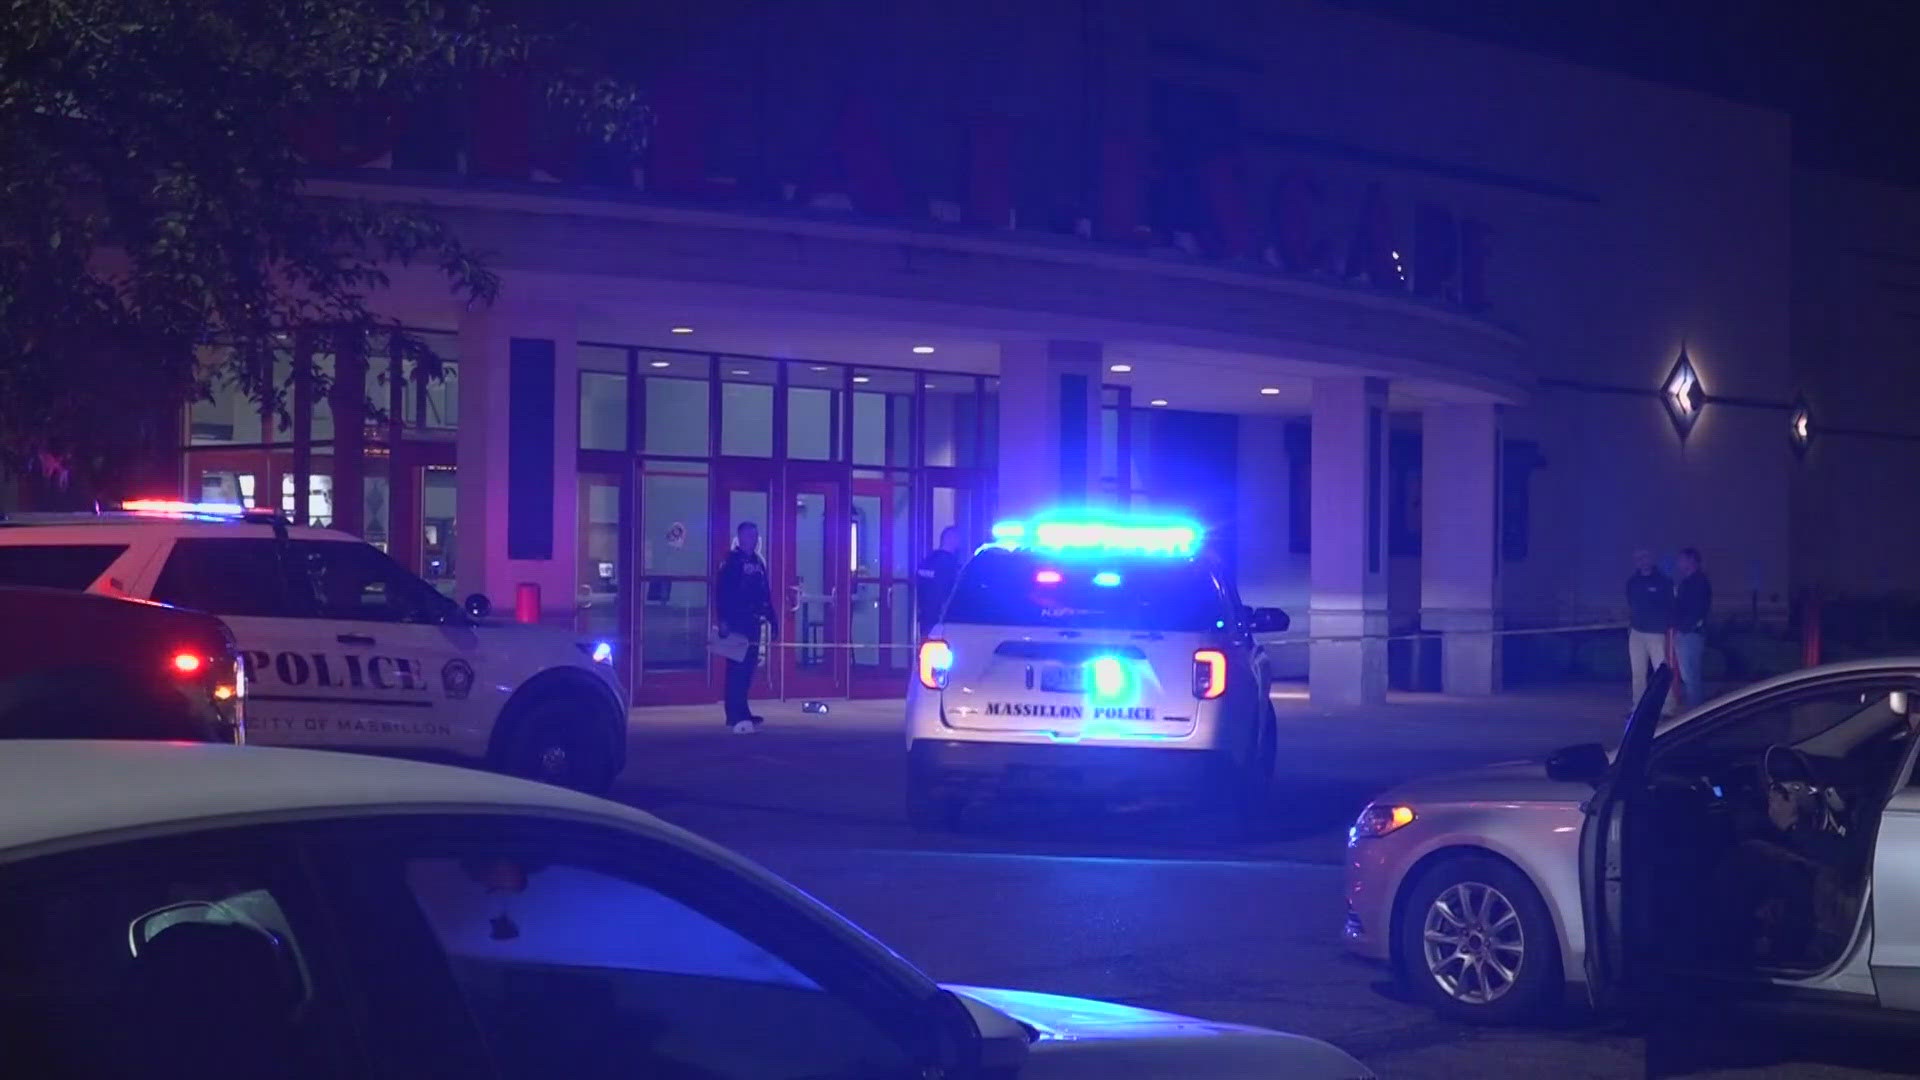 Authorities were reviewing surveillance video from the movie theater and said the investigation was ongoing.